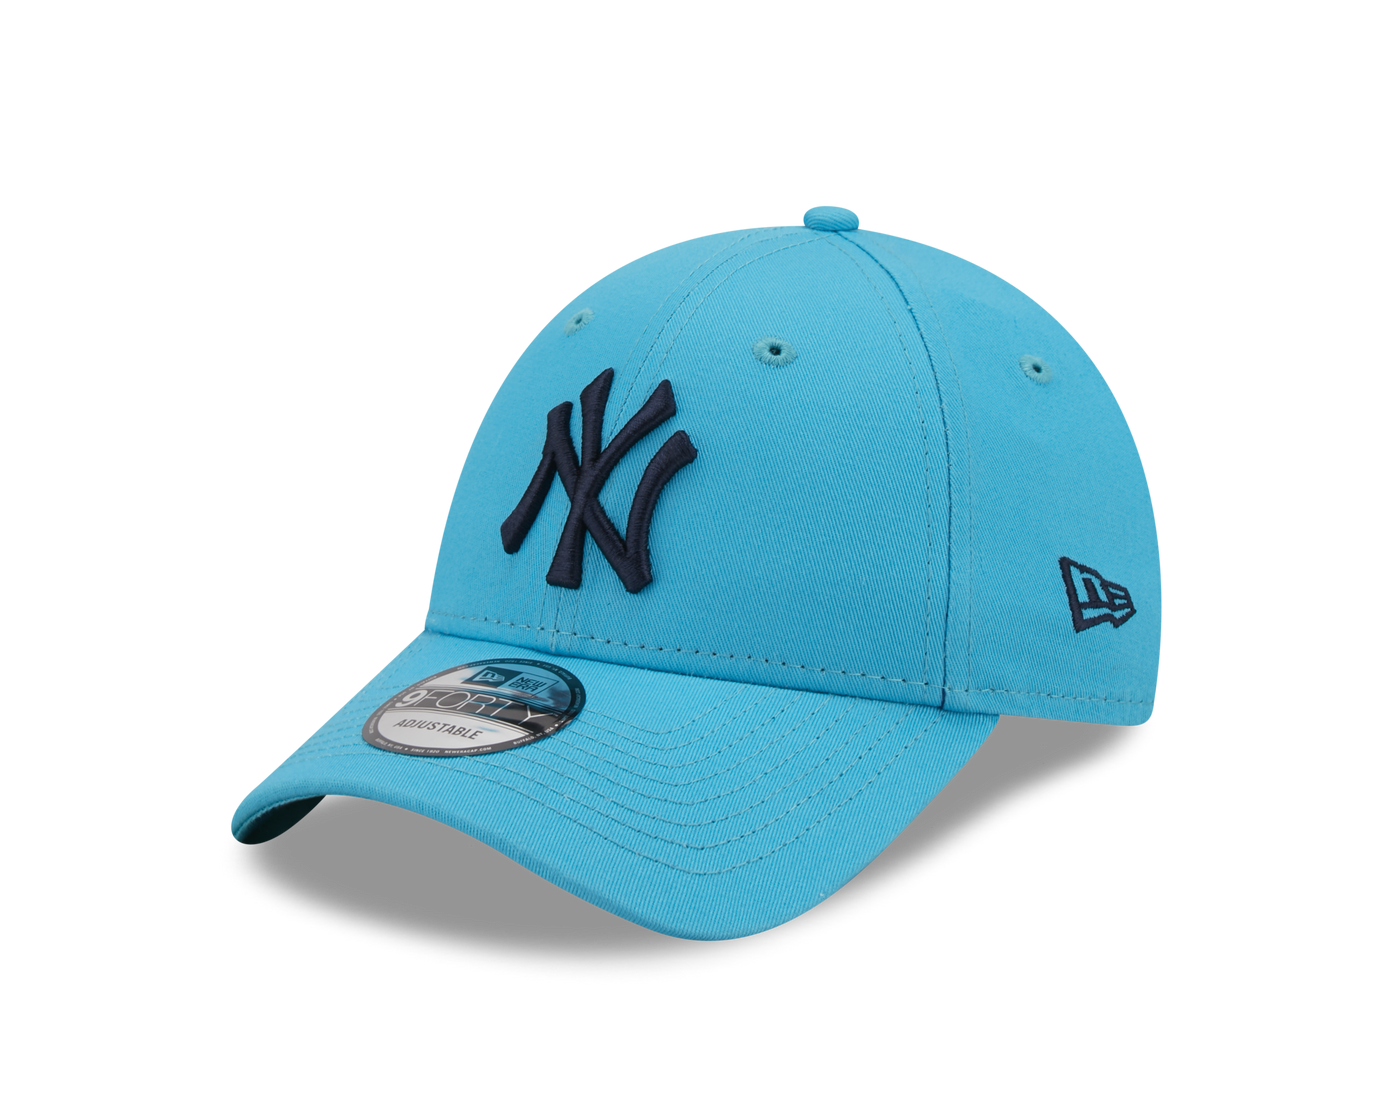 NEW YORK YANKEES LEAGUE ESSENTIAL 9FORTY BLUE 9FORTY CAP